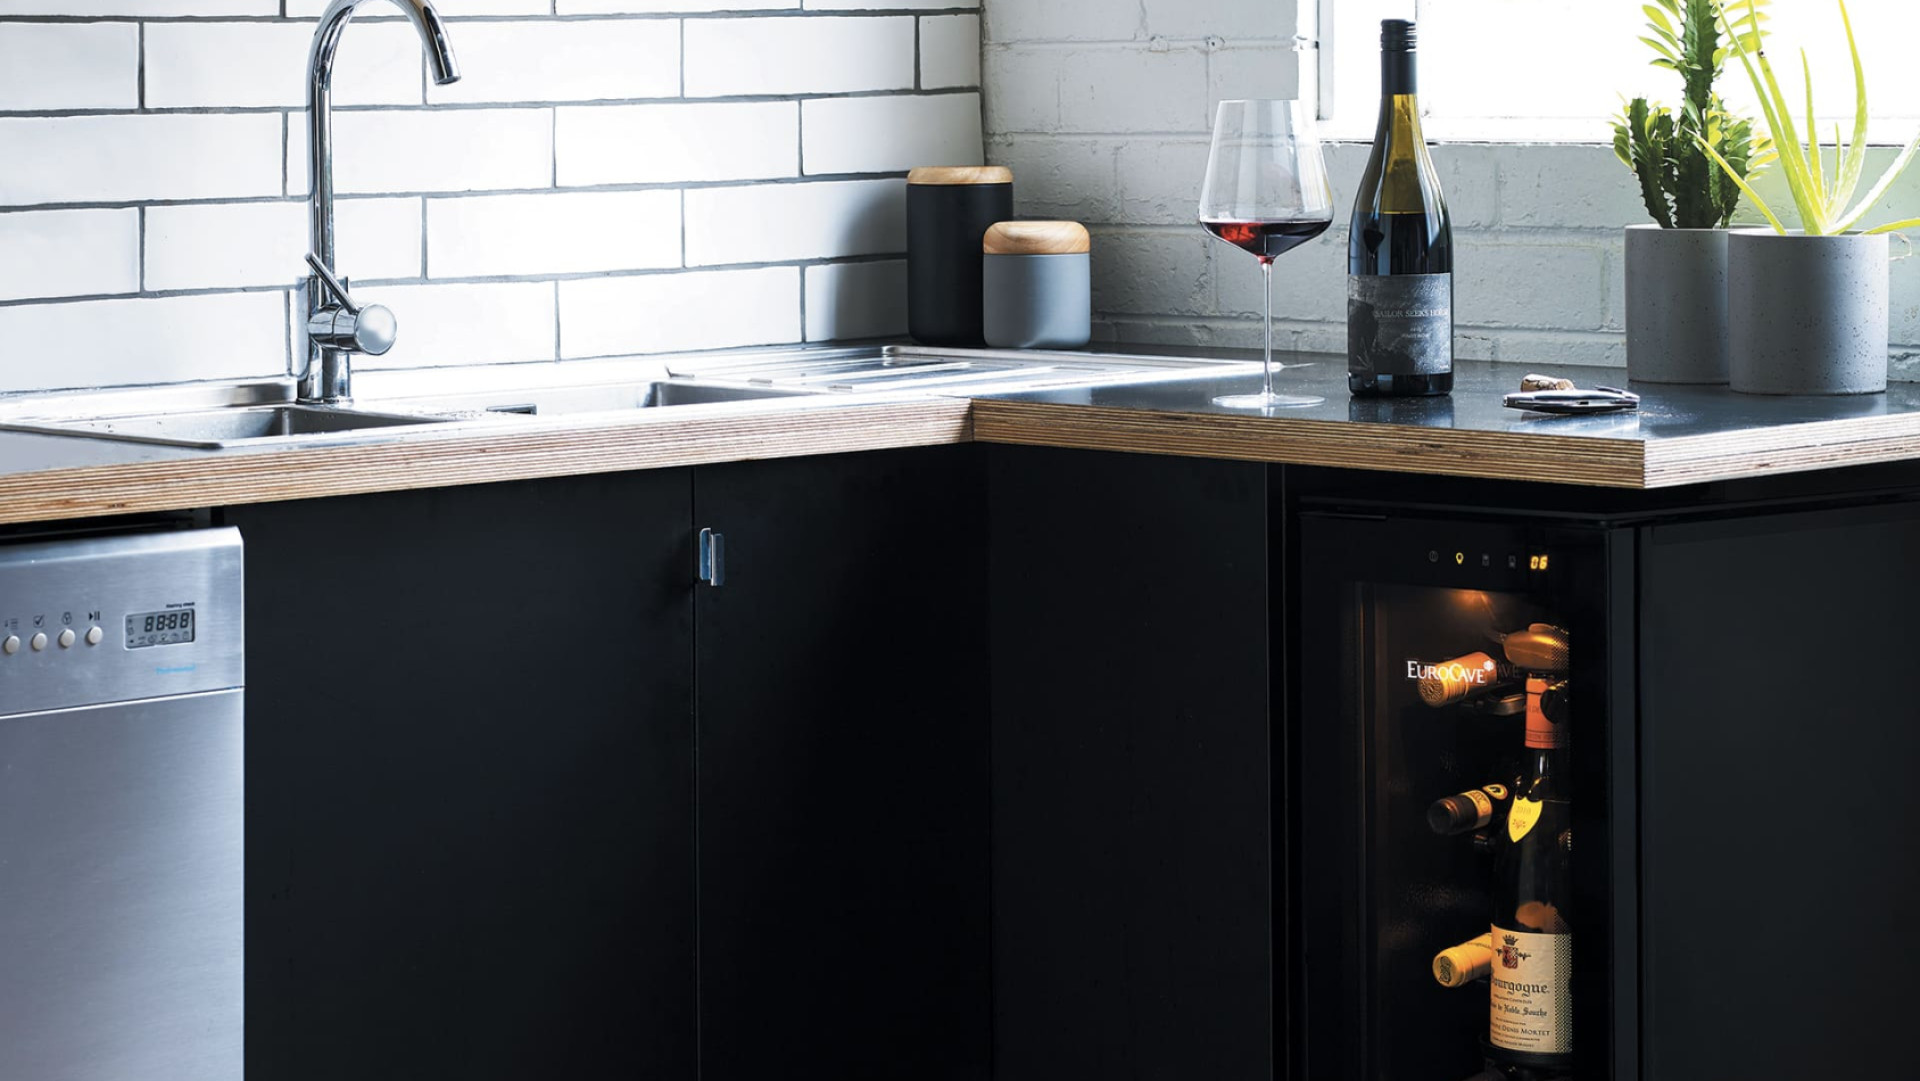 This compact built-in kitchen wine bar keeps opened bottles up to 10 days; the aromas are better preserved than a wine simply kept open in the fridge.